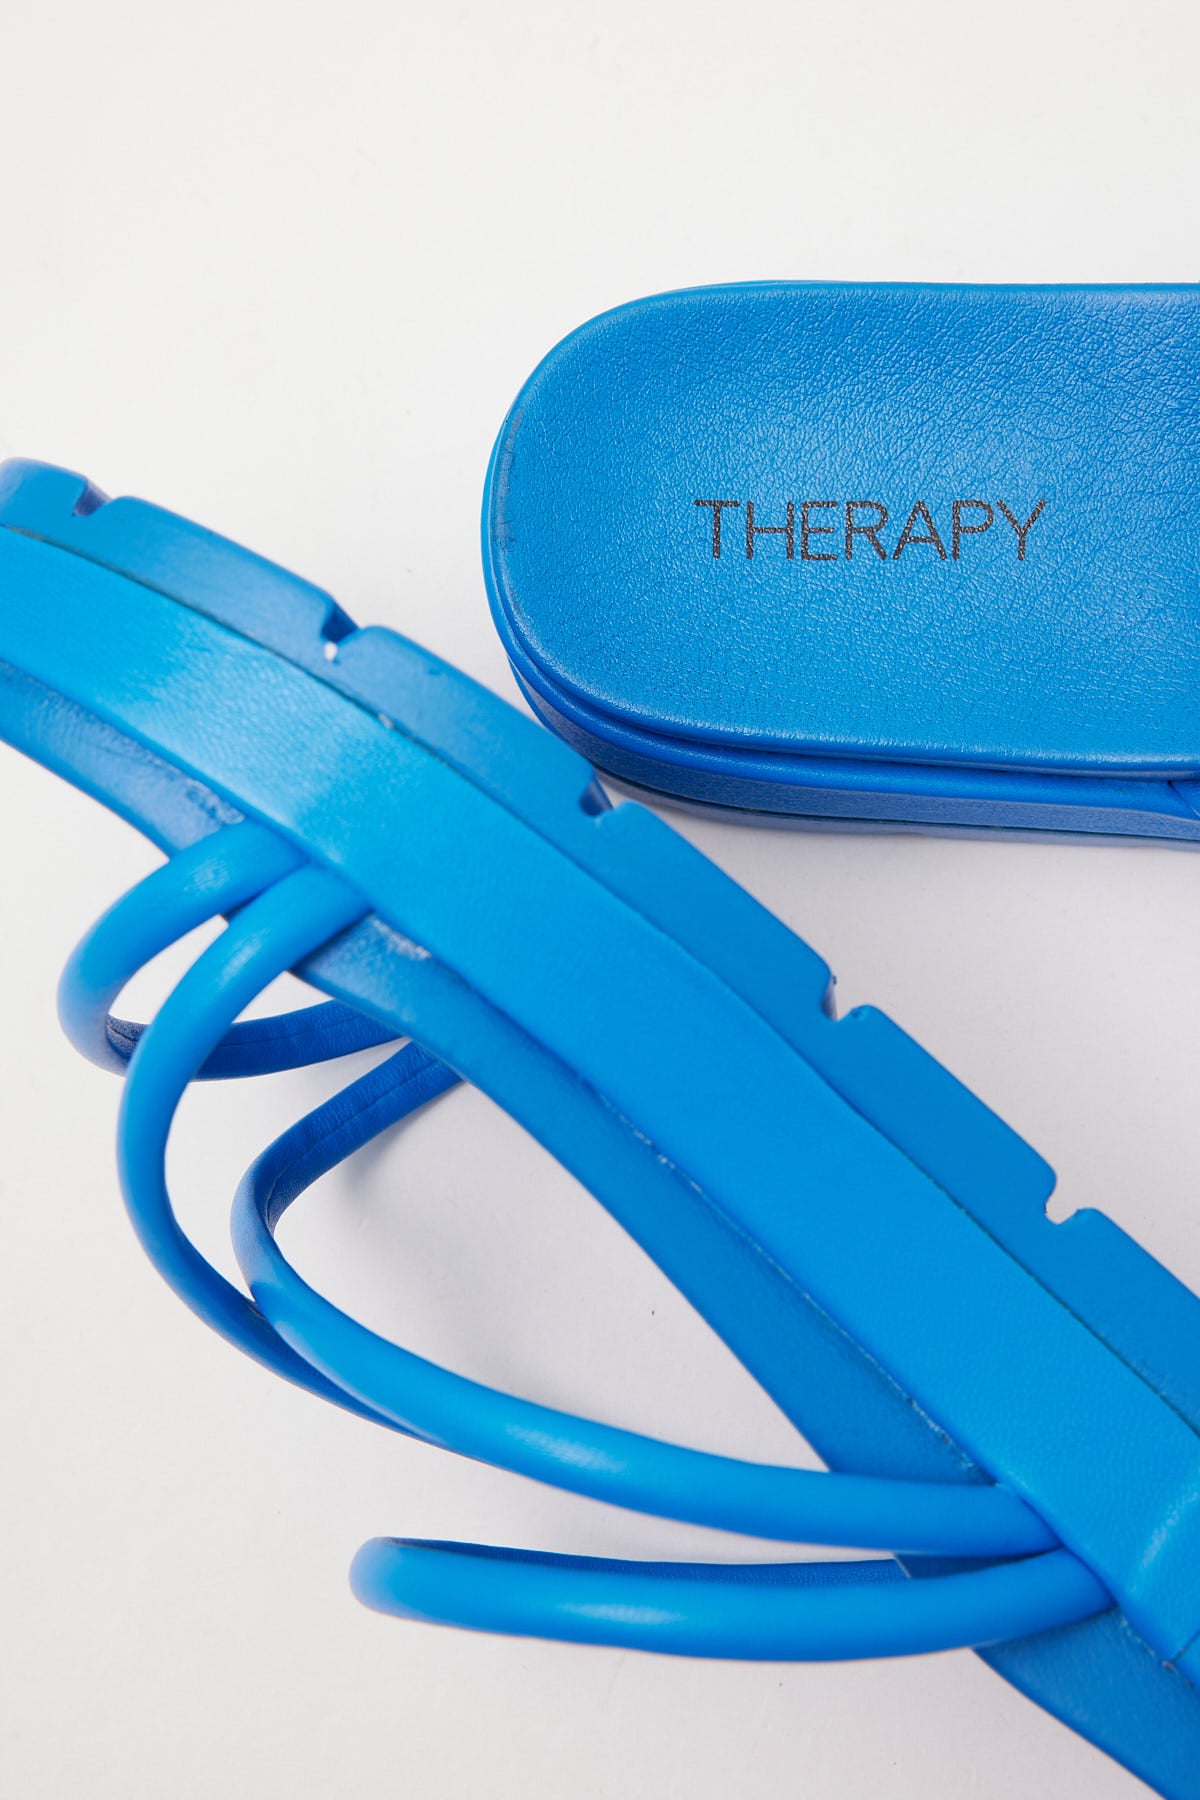 Therapy Sliver Blue